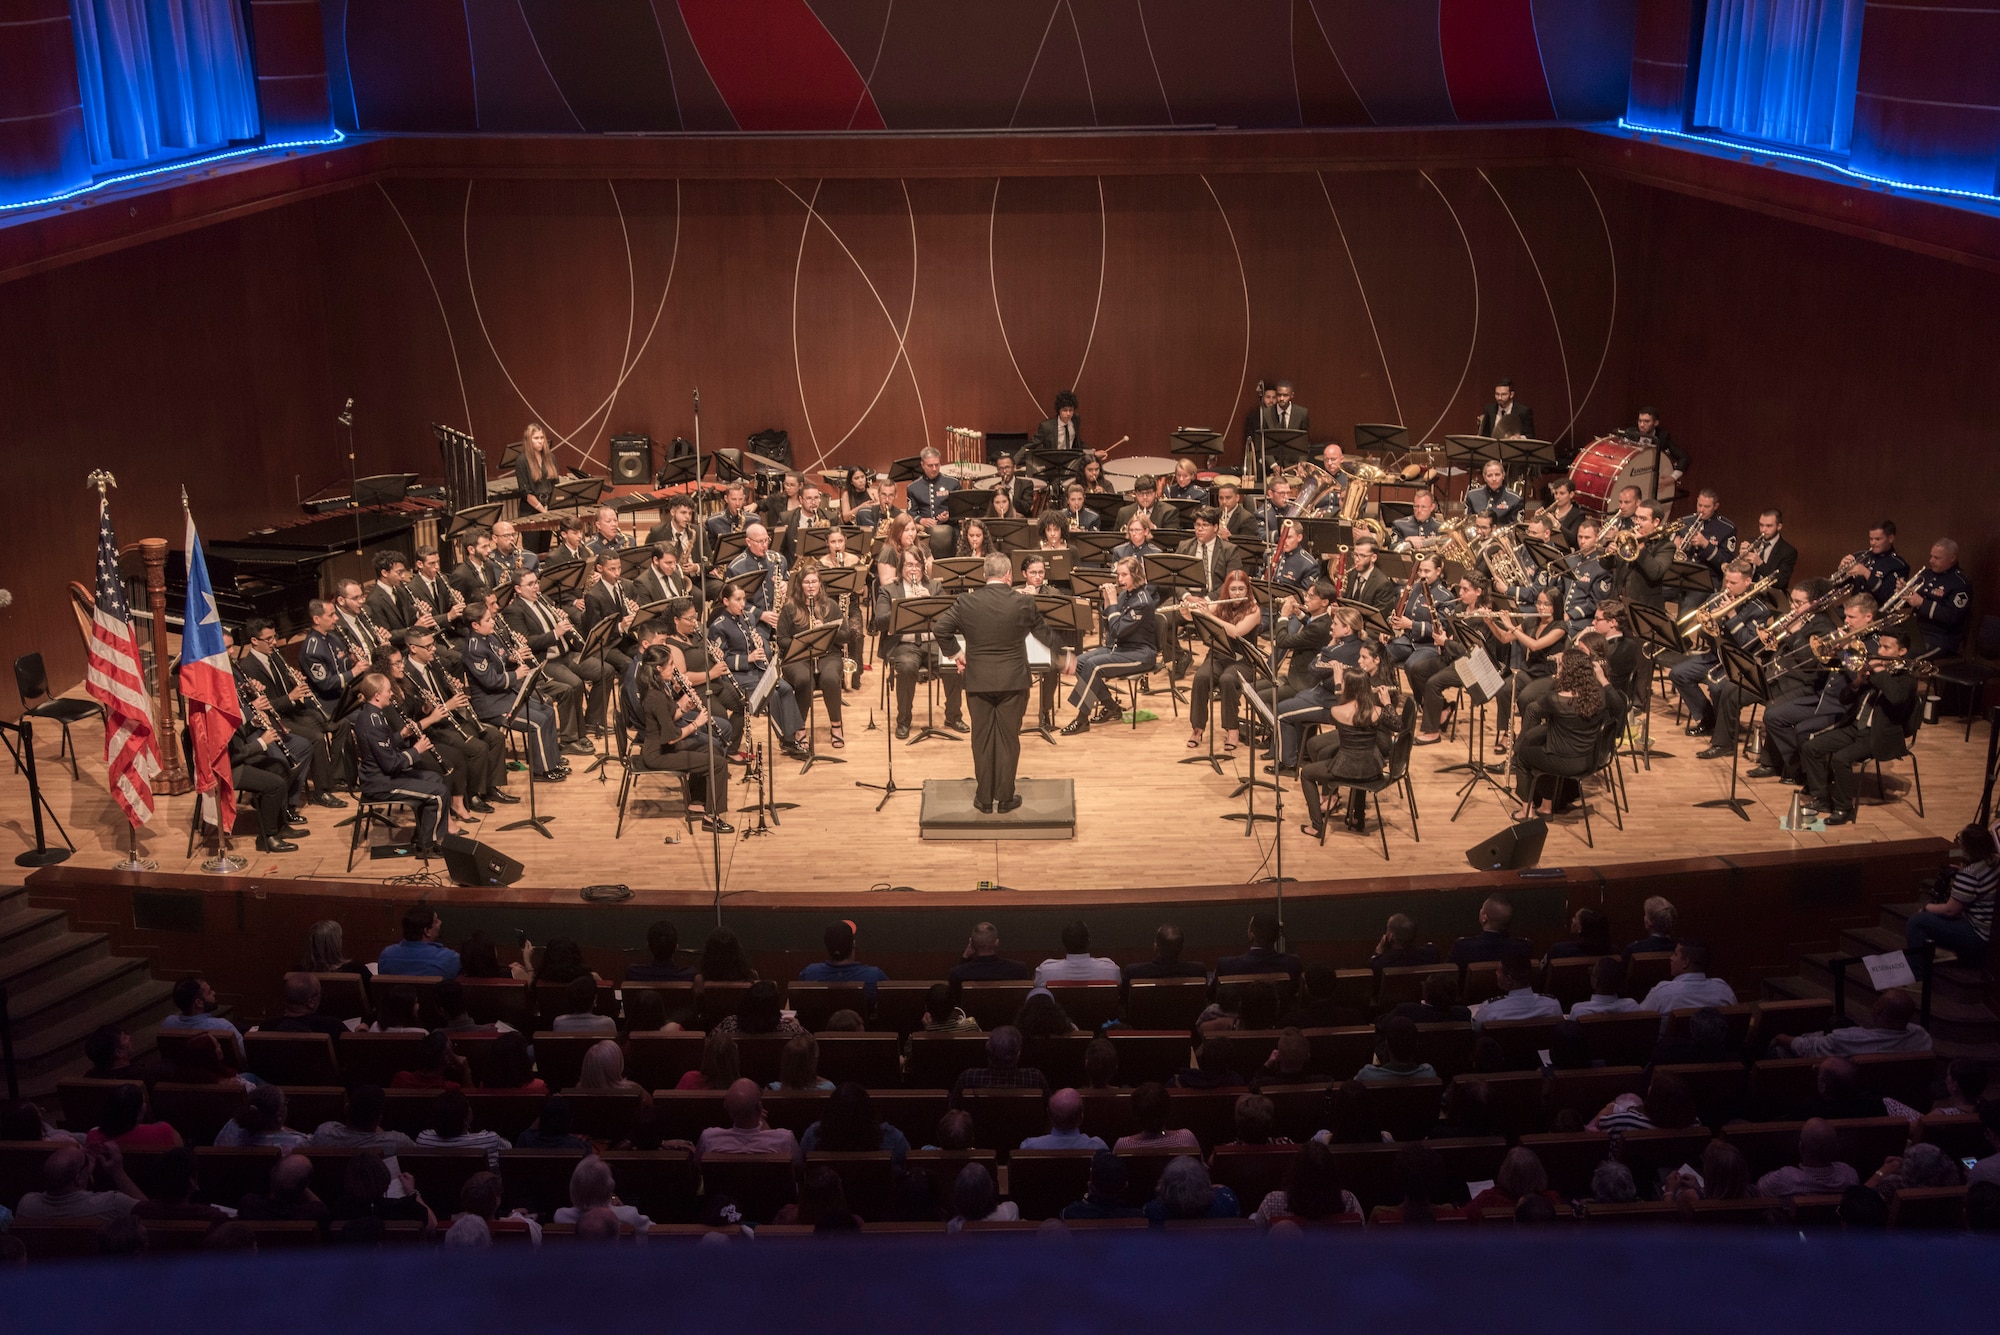 The United States Air Force Band of the West, from Joint Base San Antonio-Lackland, finish their week-long tour at the Conservatorio de Música de Puerto Rico, Sala Sanromá, in conjunction with the CMPR concert band, April 7, 2019, in San Juan, Puerto Rico. The USAF Band of the West are touring the island of Puerto Rico to tell the Air Force's story through live music and to continue building relationships with Puerto Rican communities during concerts. (Air Force photo by: Airman 1st Class Shelby Pruitt)